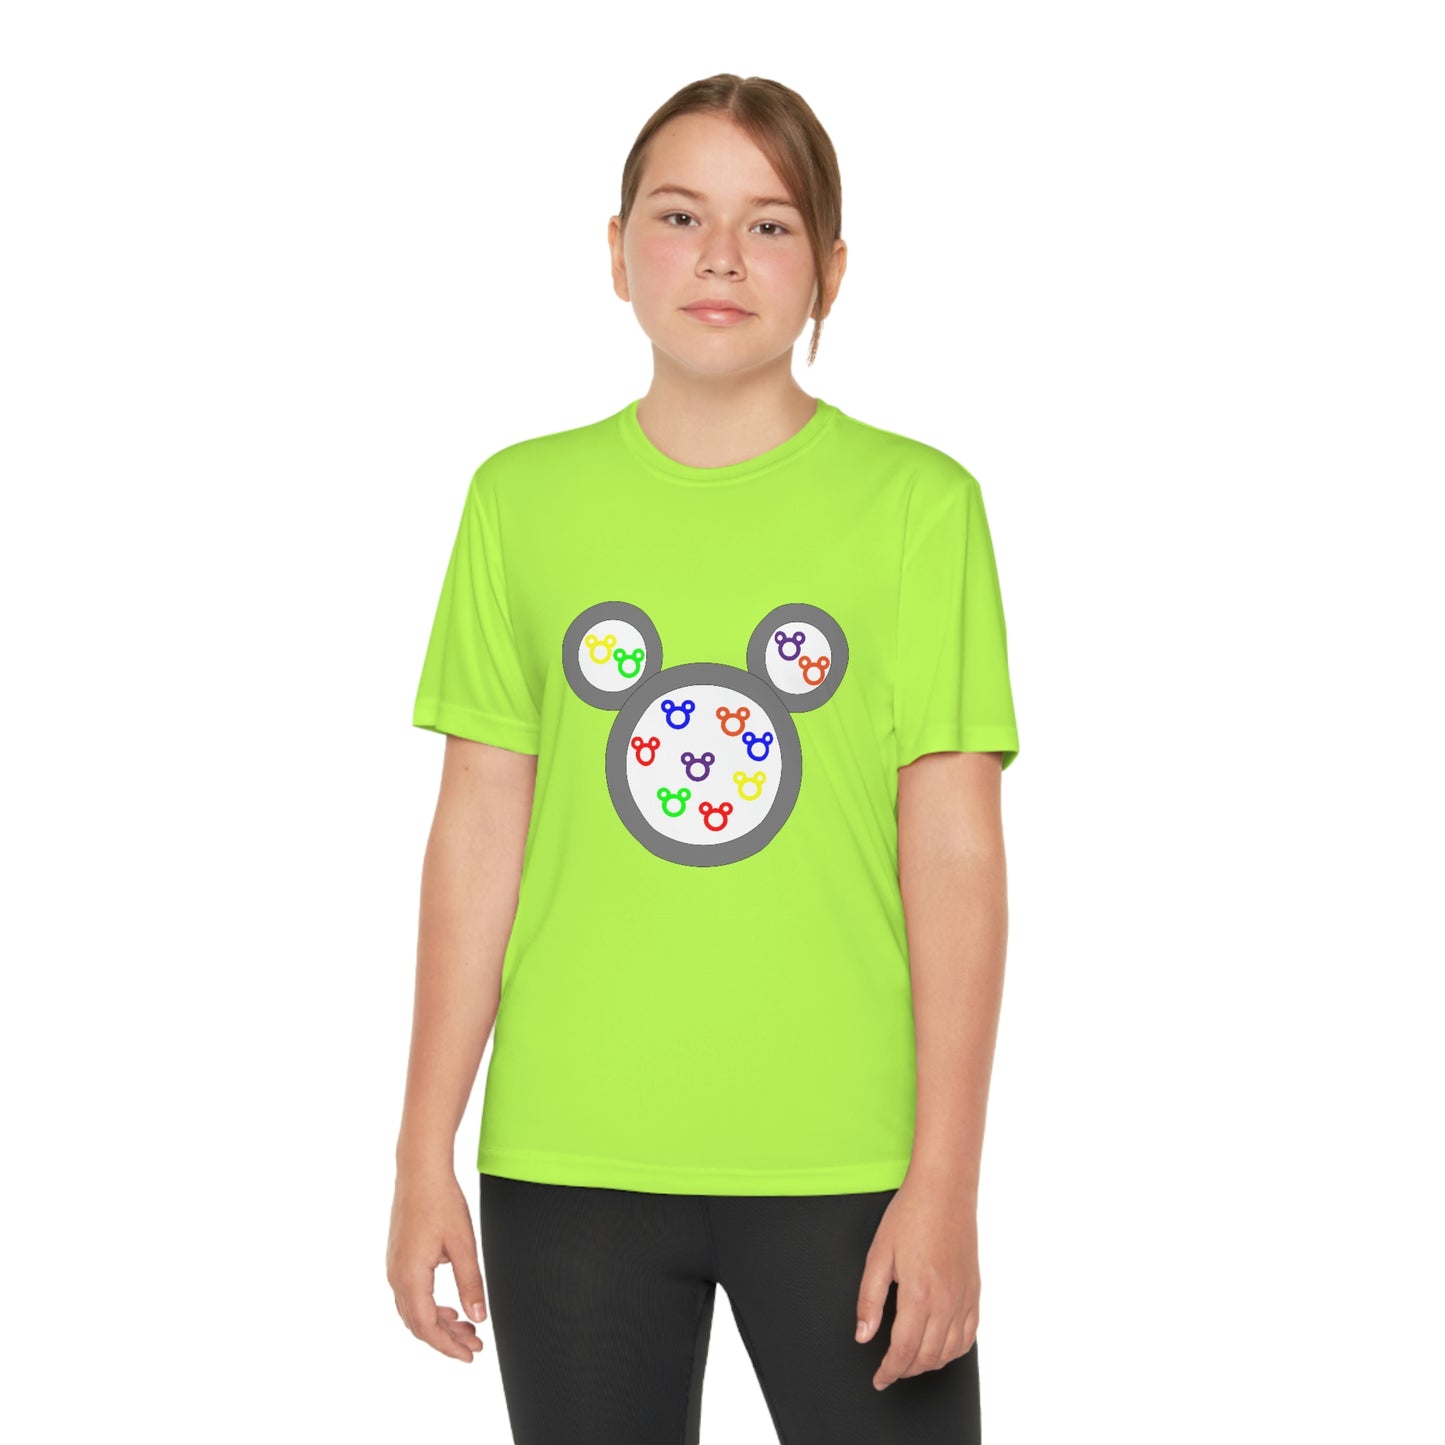 Cereal Mickey T-shirt